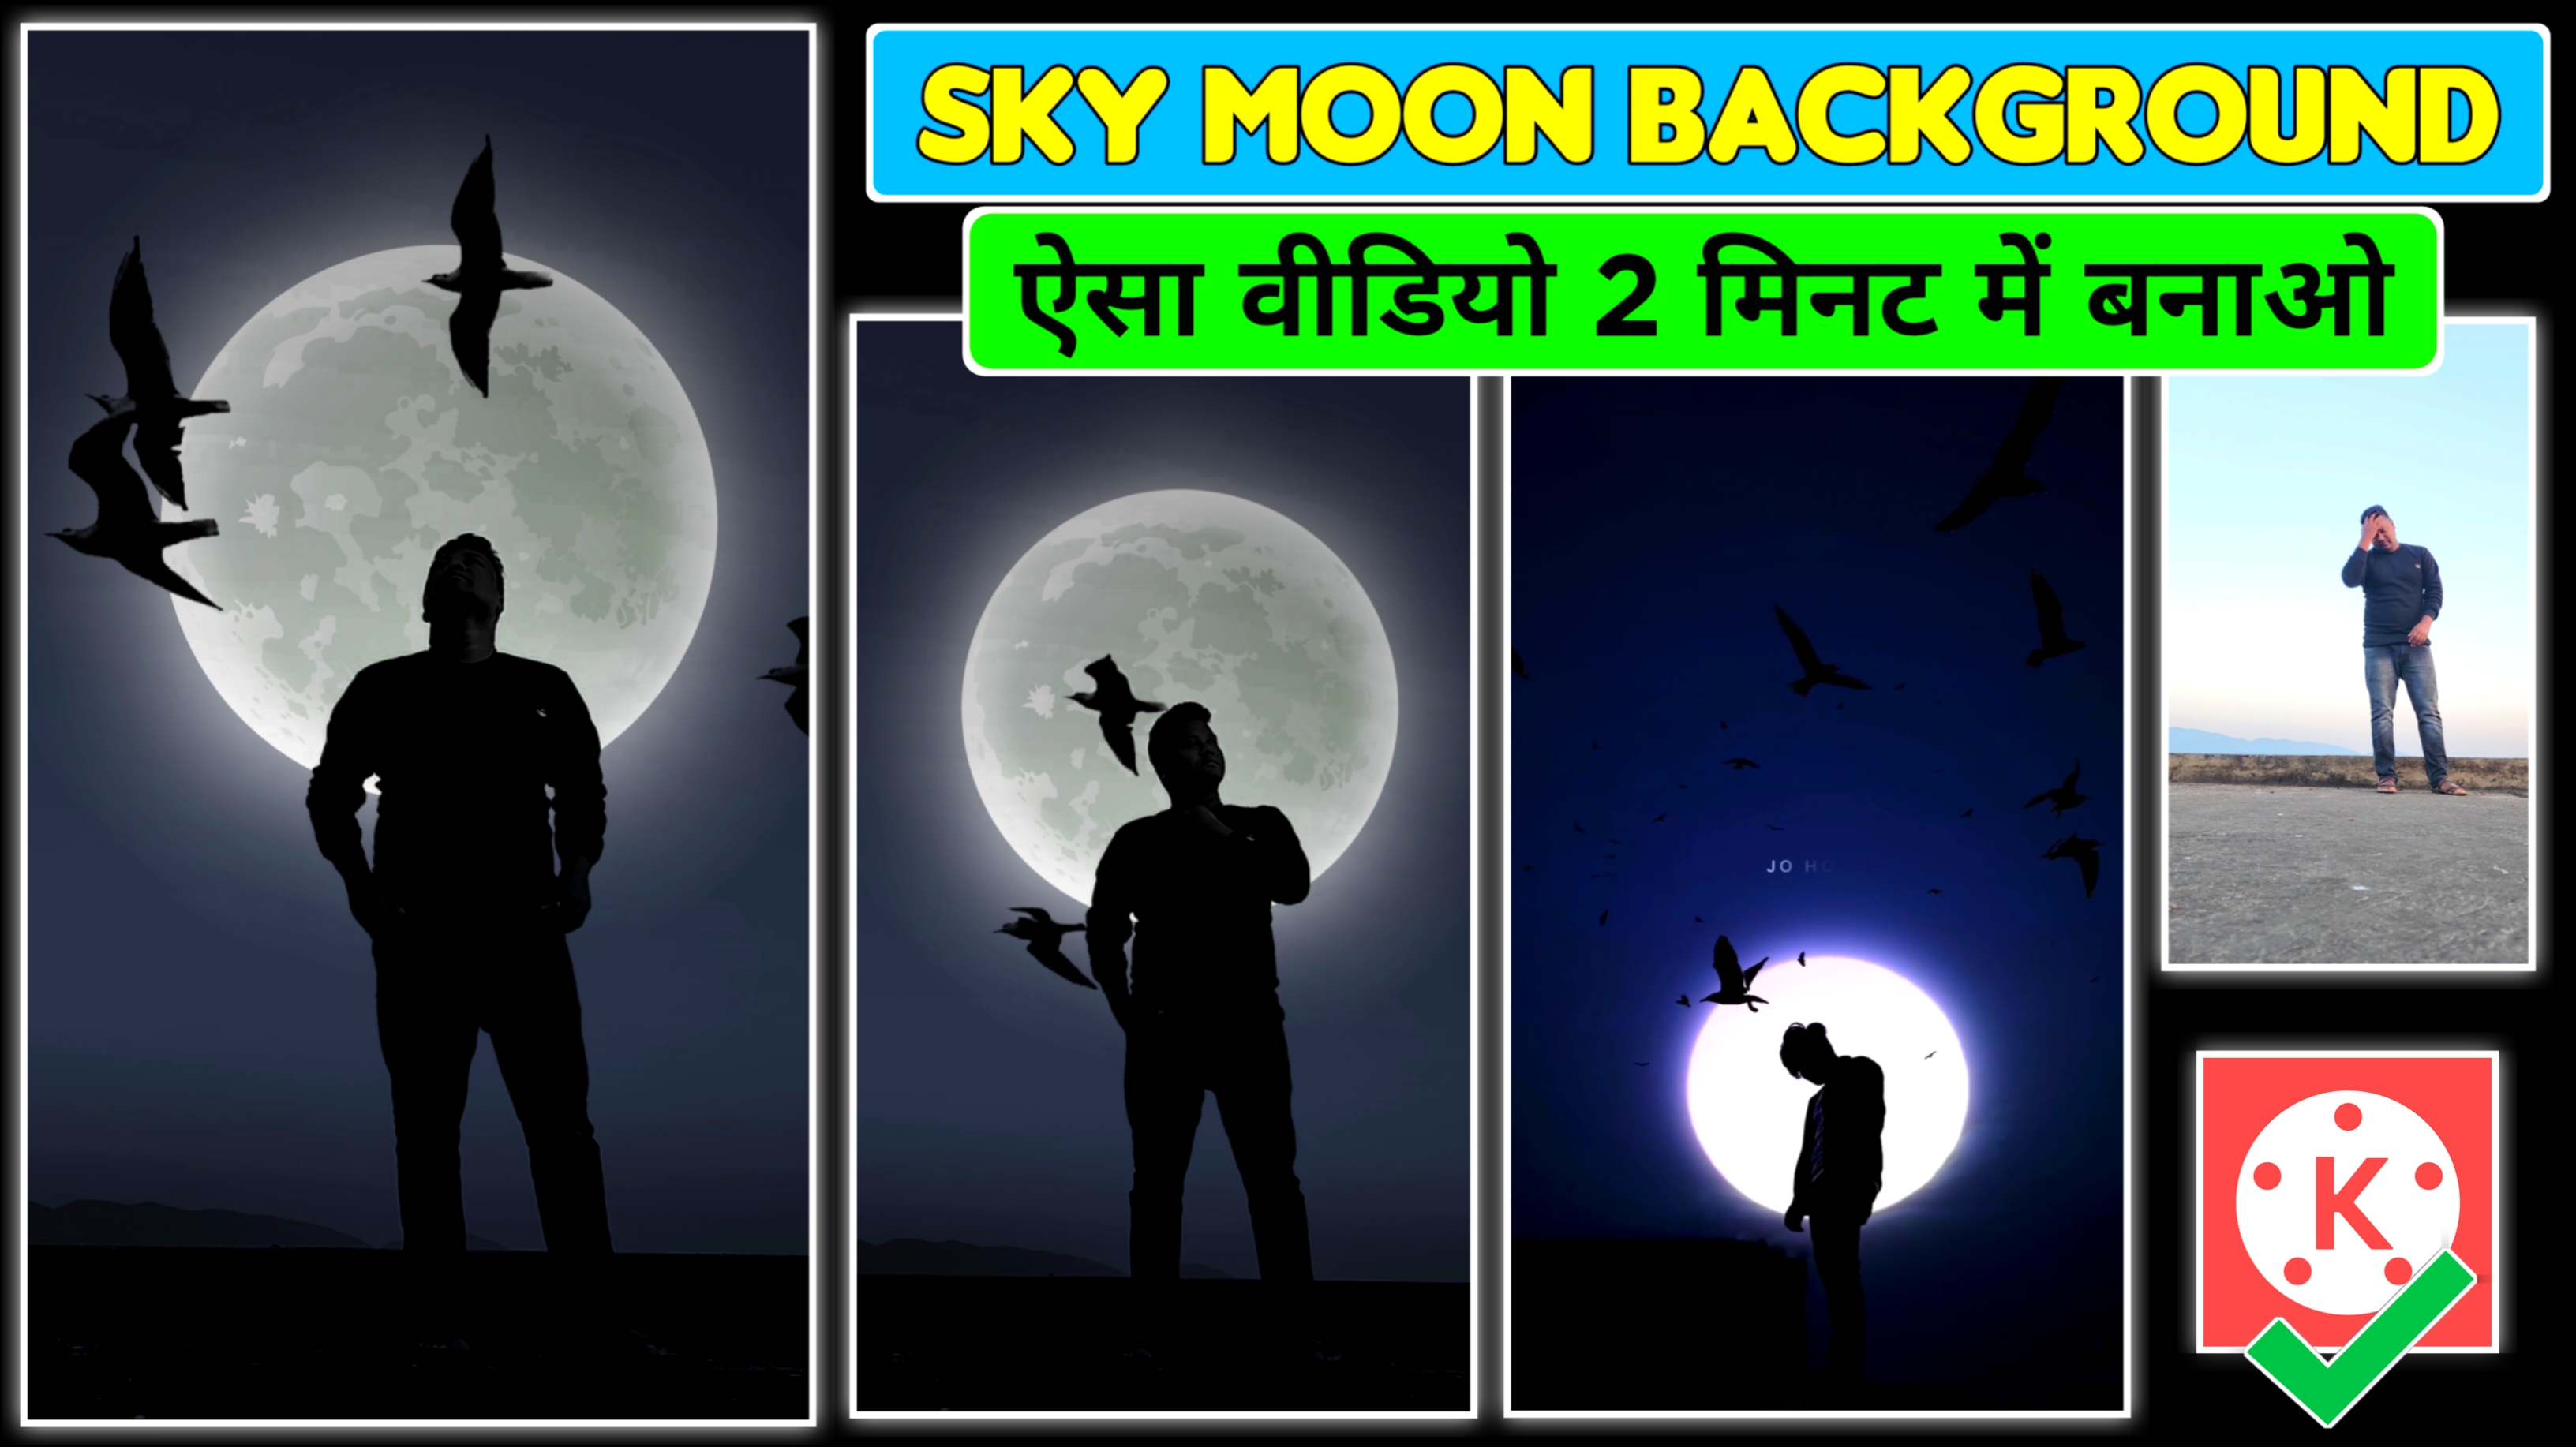 How To Make Sky Moon Background Video || Sky Moon Background Video Editing  || Kinemaster Video